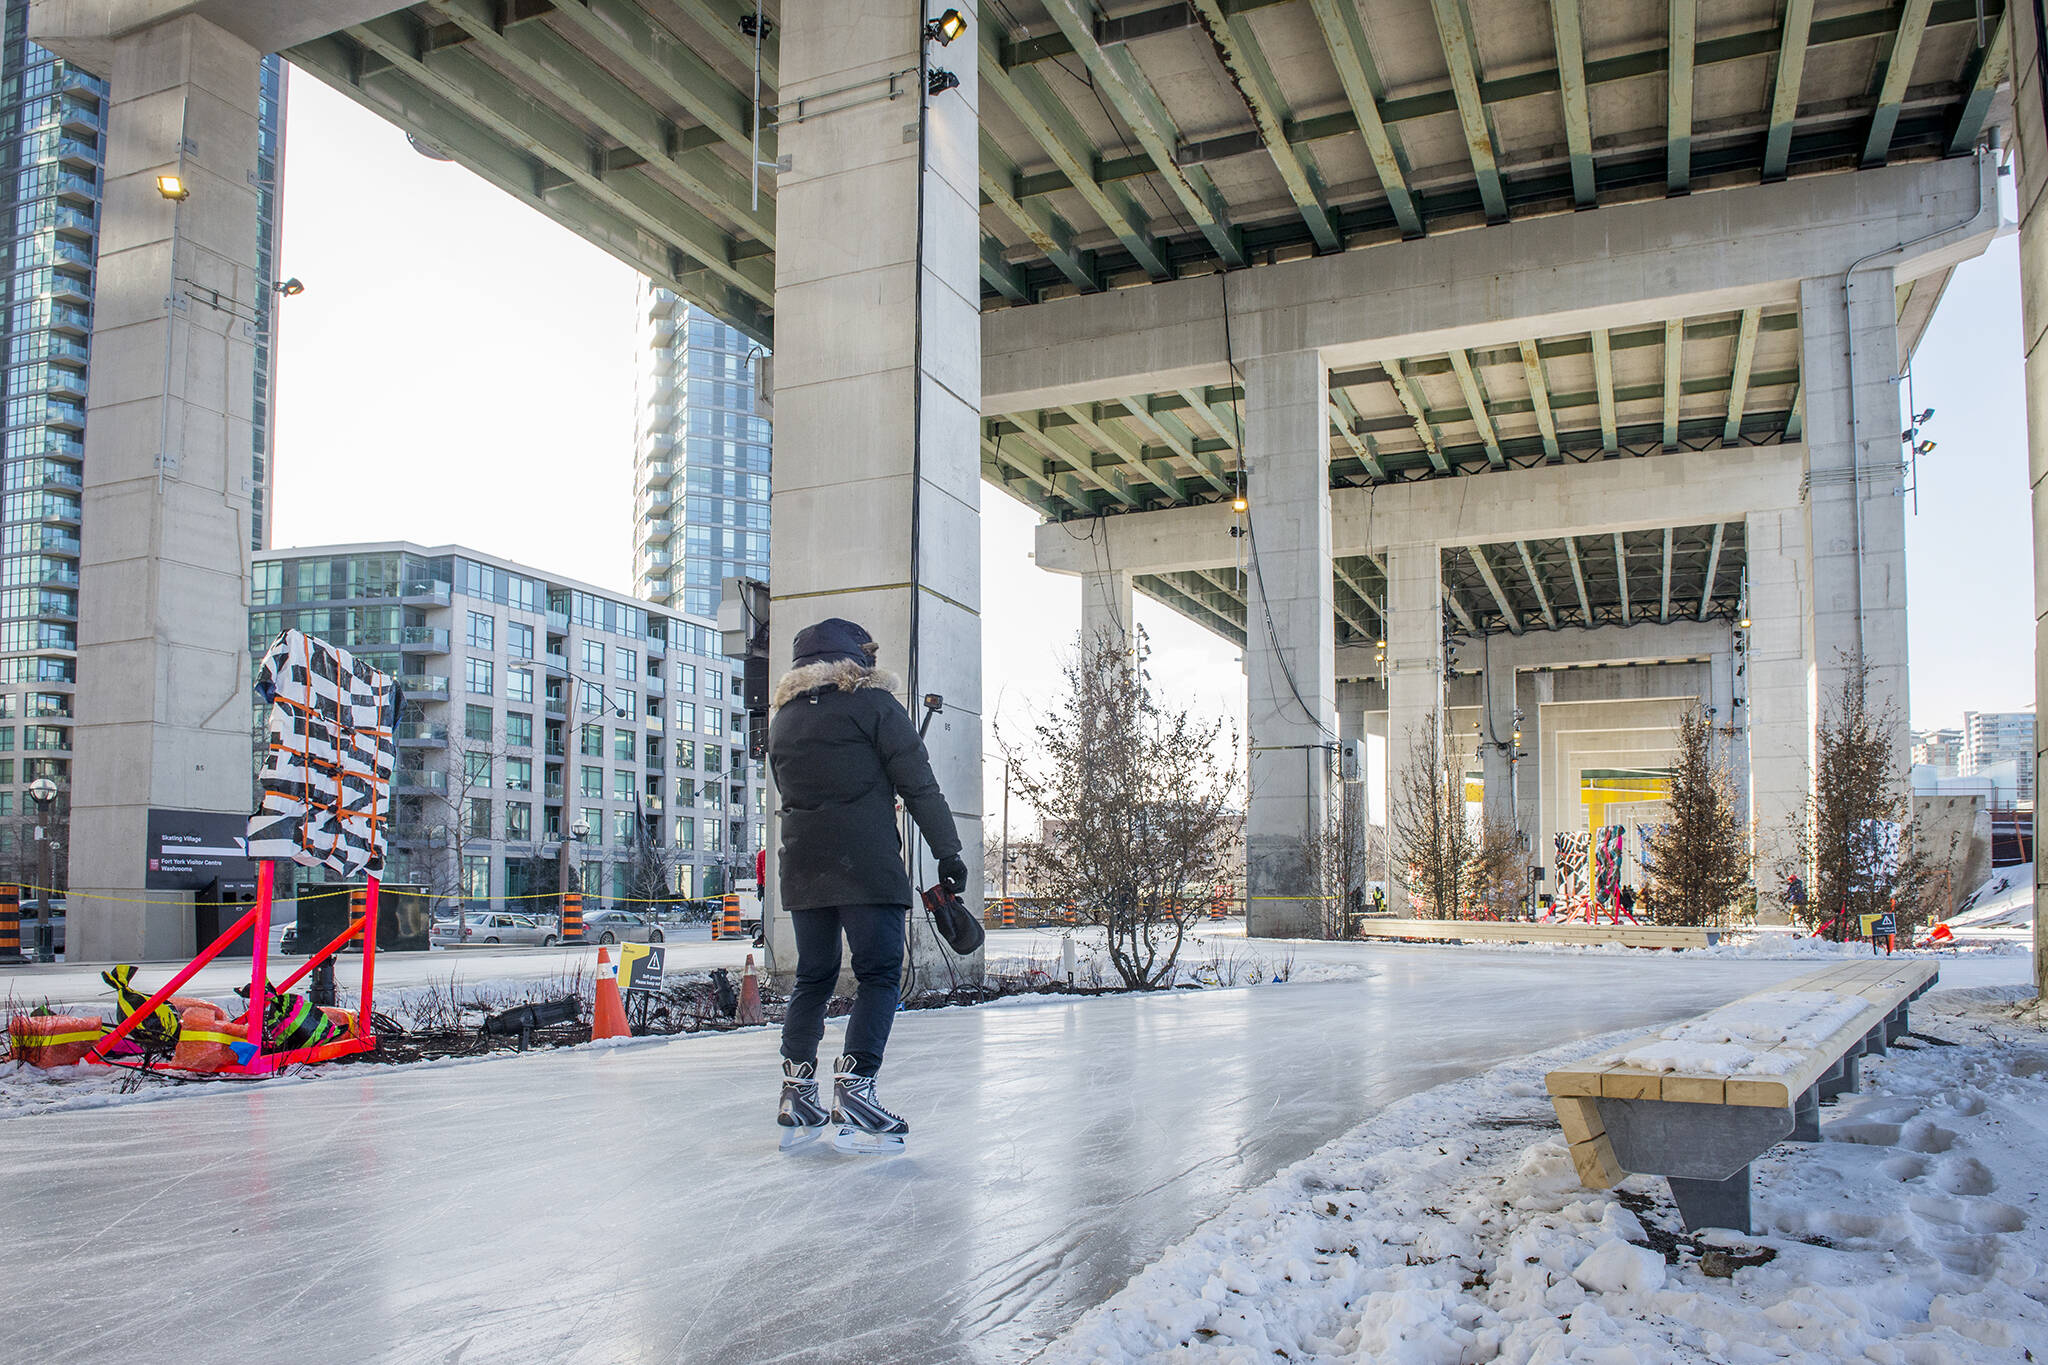 20180105 2048 TheBentway10 ?w=2048&cmd=resize Then Crop&height=1365&quality=70